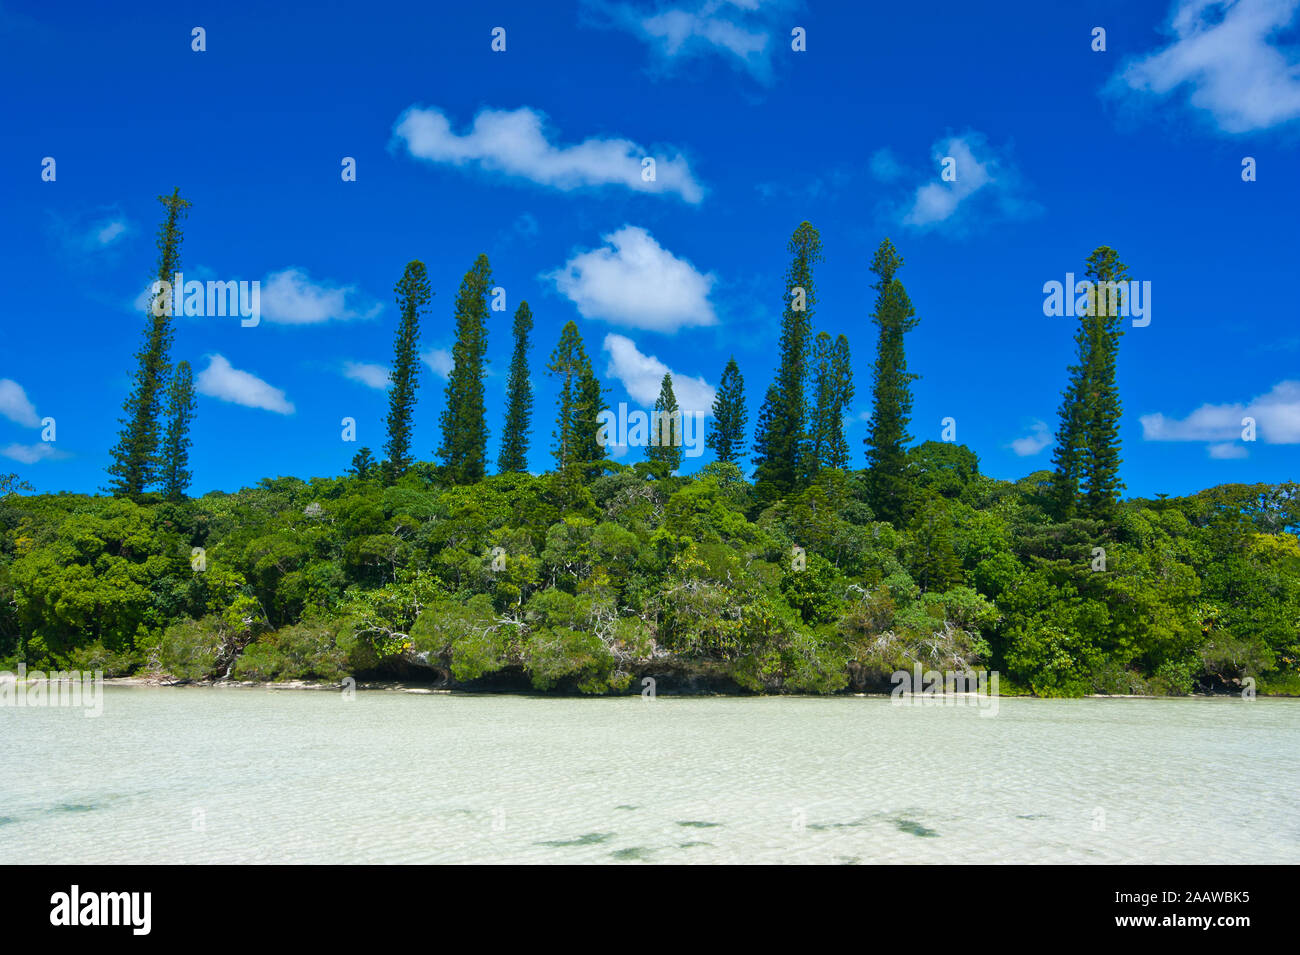 Scenic view of trees growing by sea against blue sky during sunny day, Melanesia, New Caledonia Stock Photo